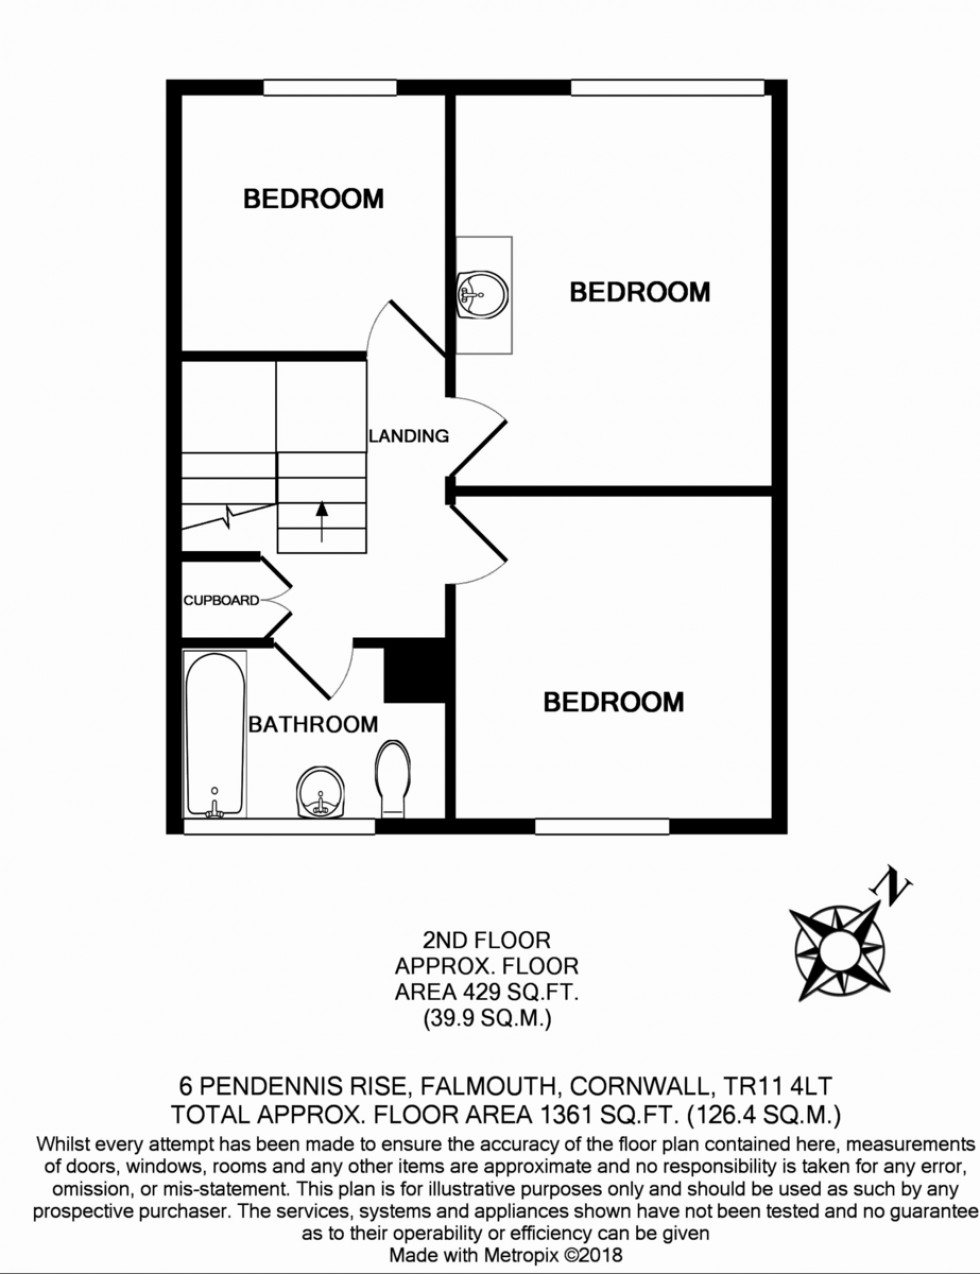 Floorplan for 6 Pendennis Rise, Falmouth - 2024 STUDENT PROPERTY